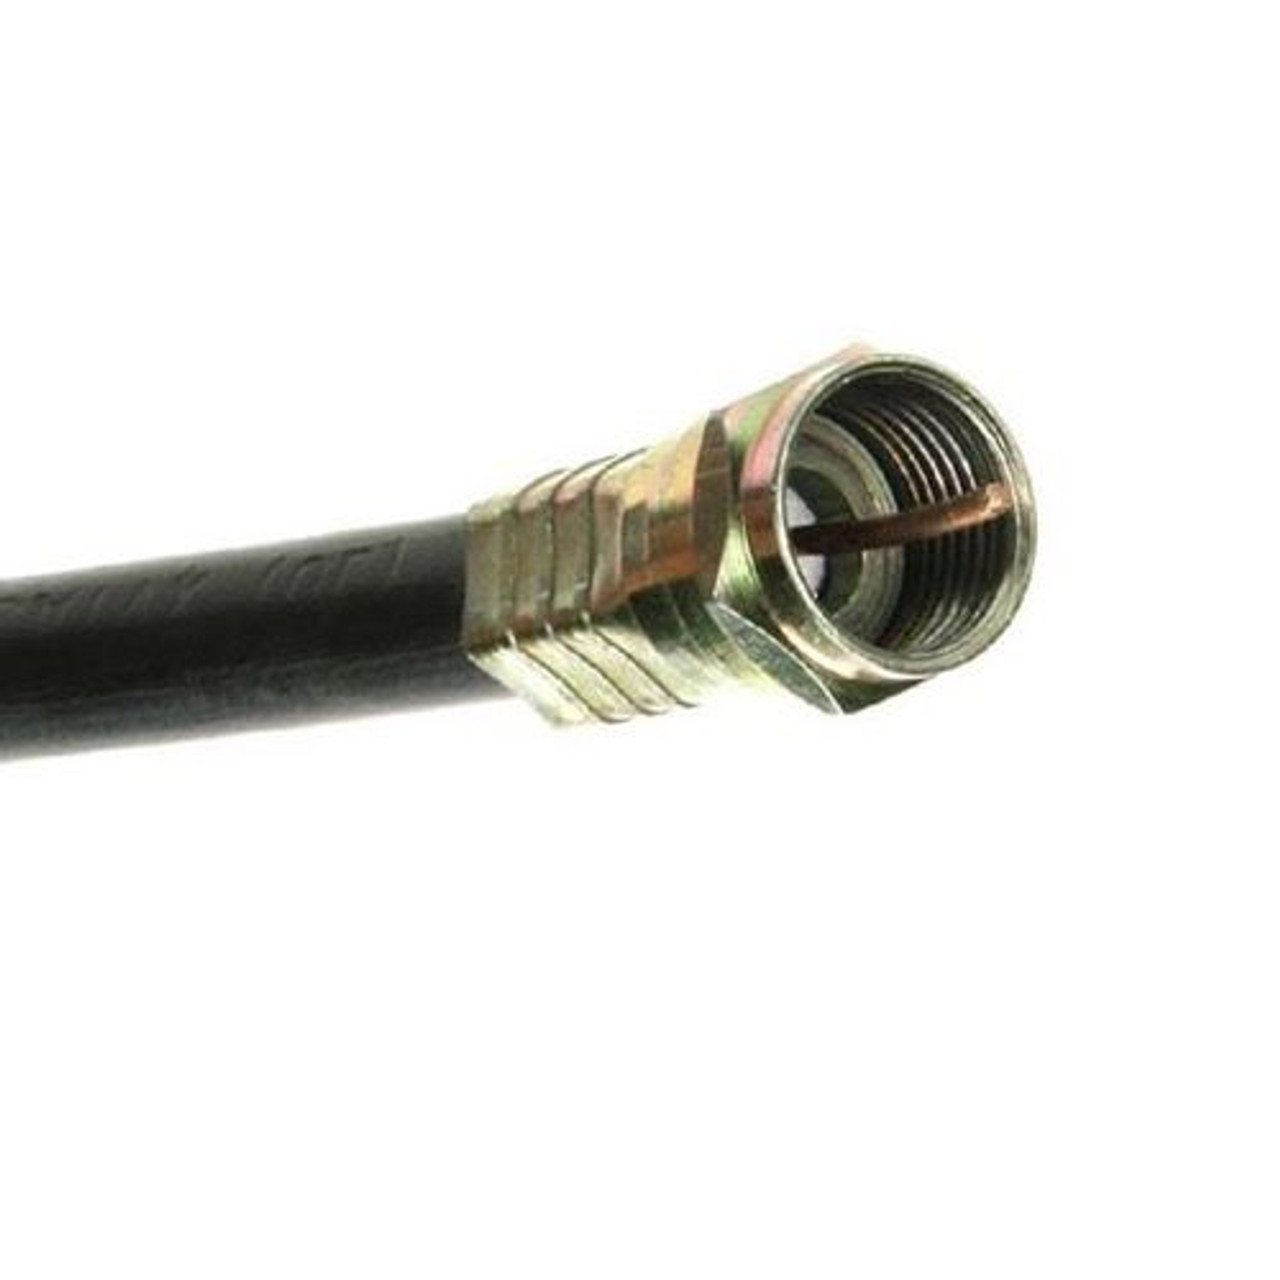 Summit Coaxial Cable RG6 6' FT 2 GHz RF Shielded Male to Male with F Connector Installed Each End Gold Plate Brass Audio Video 18 Gauge Copper Clad 75 Ohm Assembly RG-6 HDTV Jumper